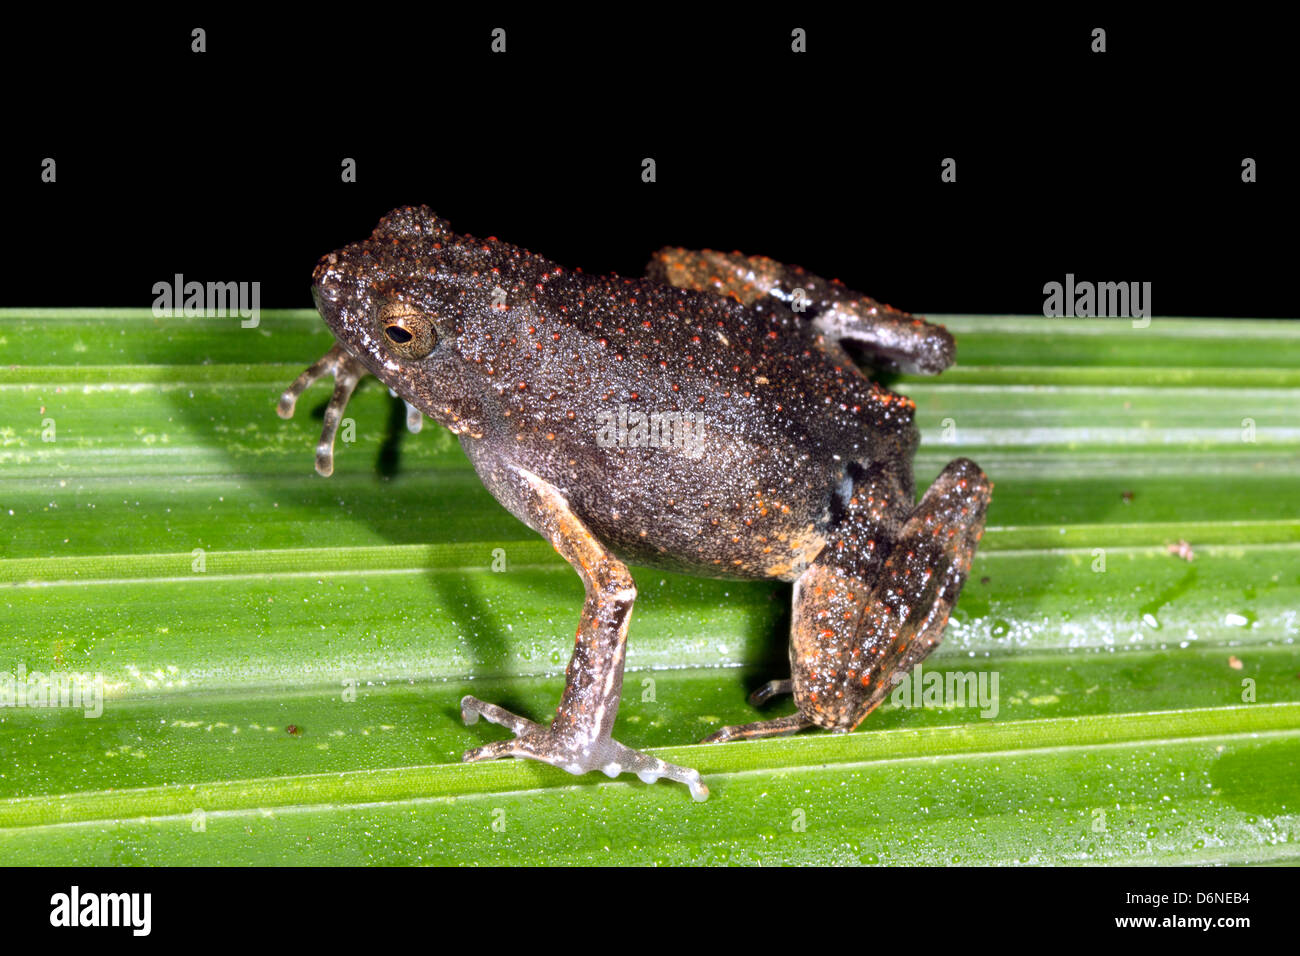 Peters' Dwarf Frog (Engystomops petersi) on a palm frond in rainforest, Ecuador Stock Photo